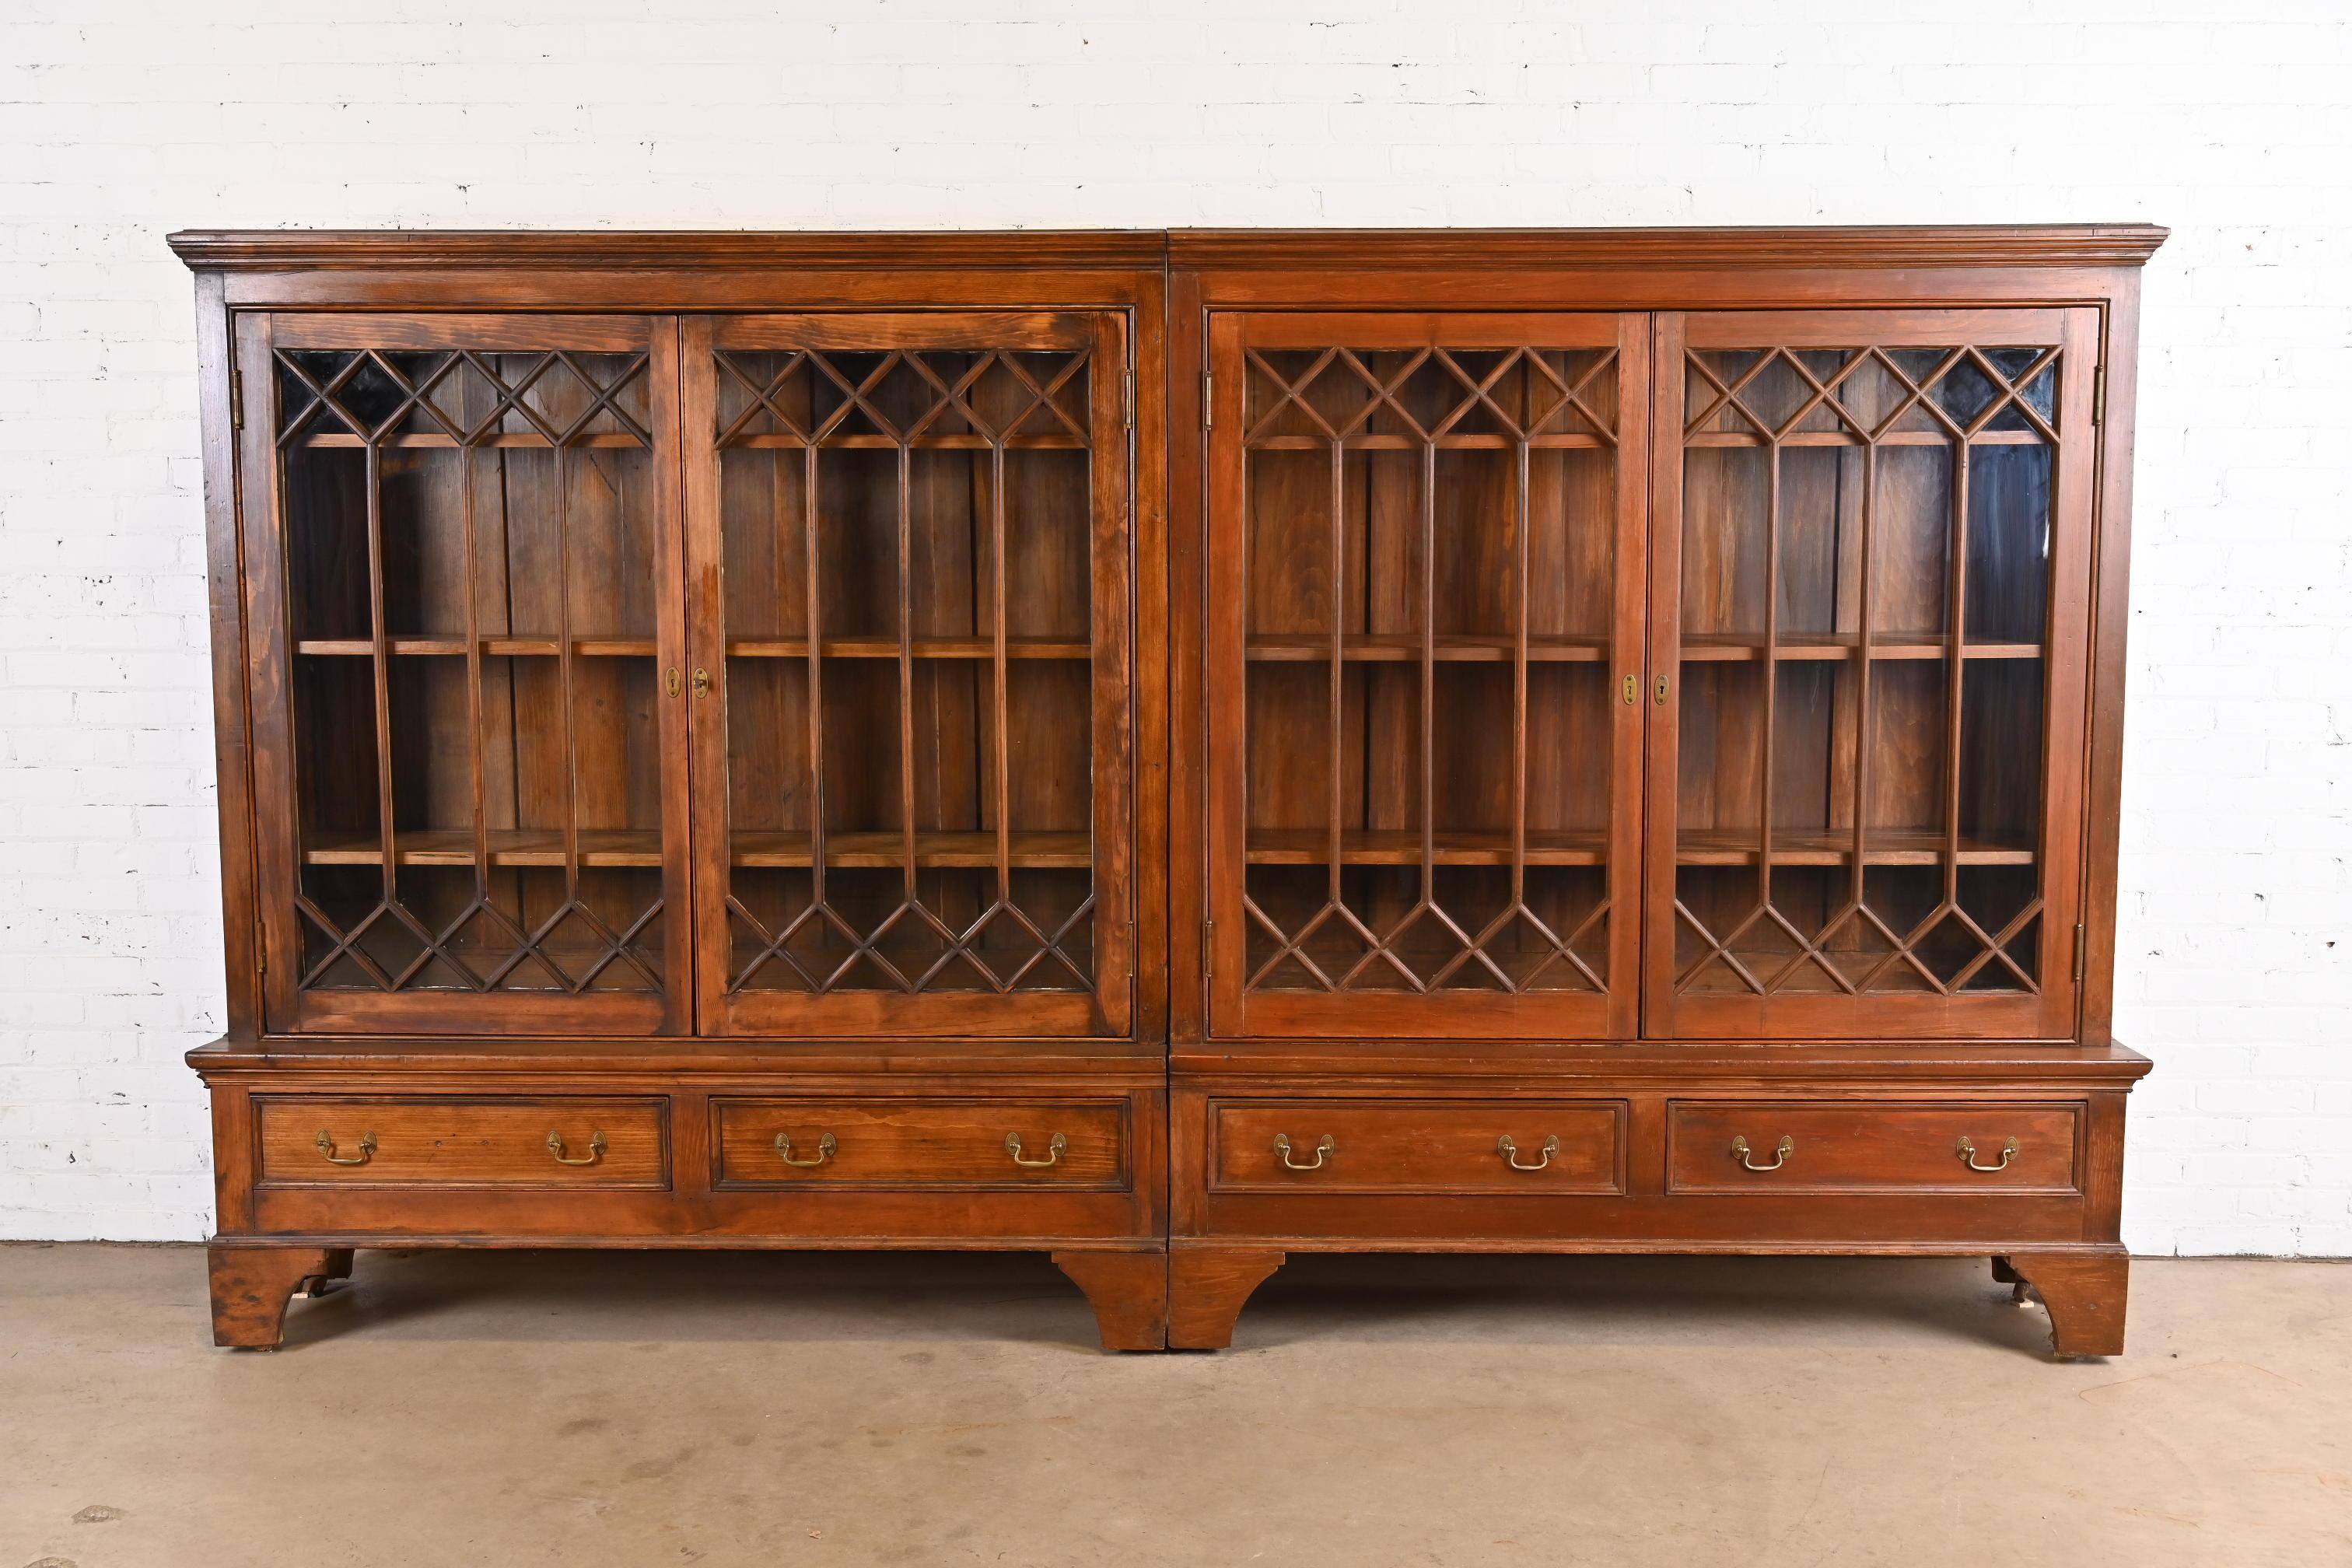 A gorgeous monumental antique Georgian or American Colonial four-door bookcase cabinet

USA, Circa 1900

Solid carved pine, with mullioned glass front doors, step back base with four drawers, and brass hardware.

Measures: 124.25